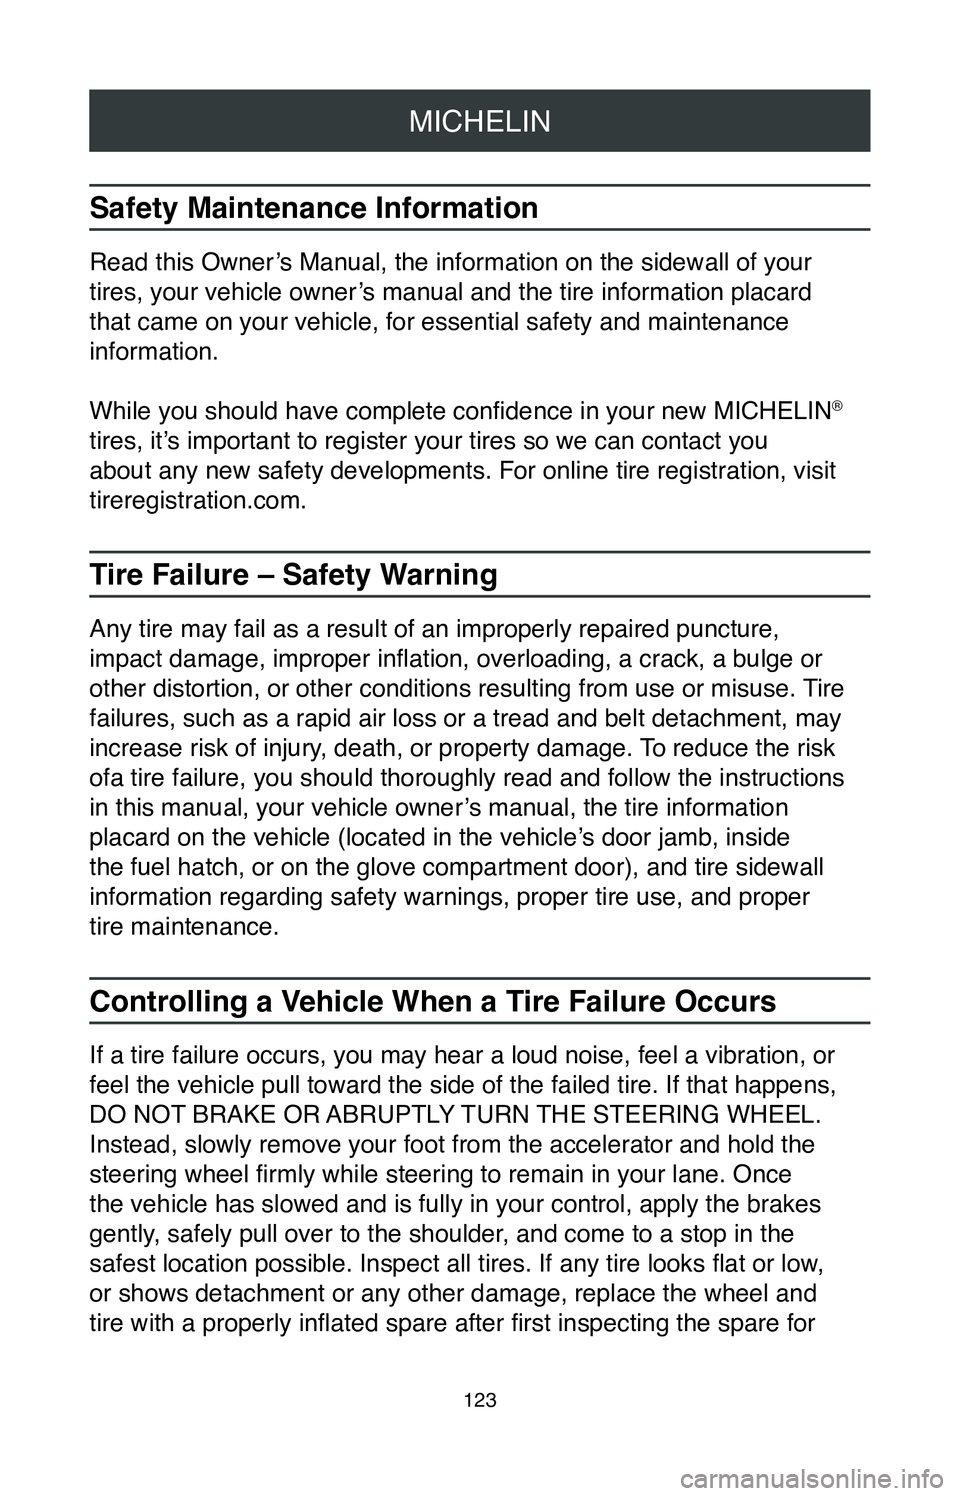 TOYOTA MIRAI 2020  Warranties & Maintenance Guides (in English) MICHELIN
123
Safety Maintenance Information
Read this Owner’s Manual, the information on the sidewall of your 
tires, your vehicle owner’s manual and the tire information placard 
that came on you